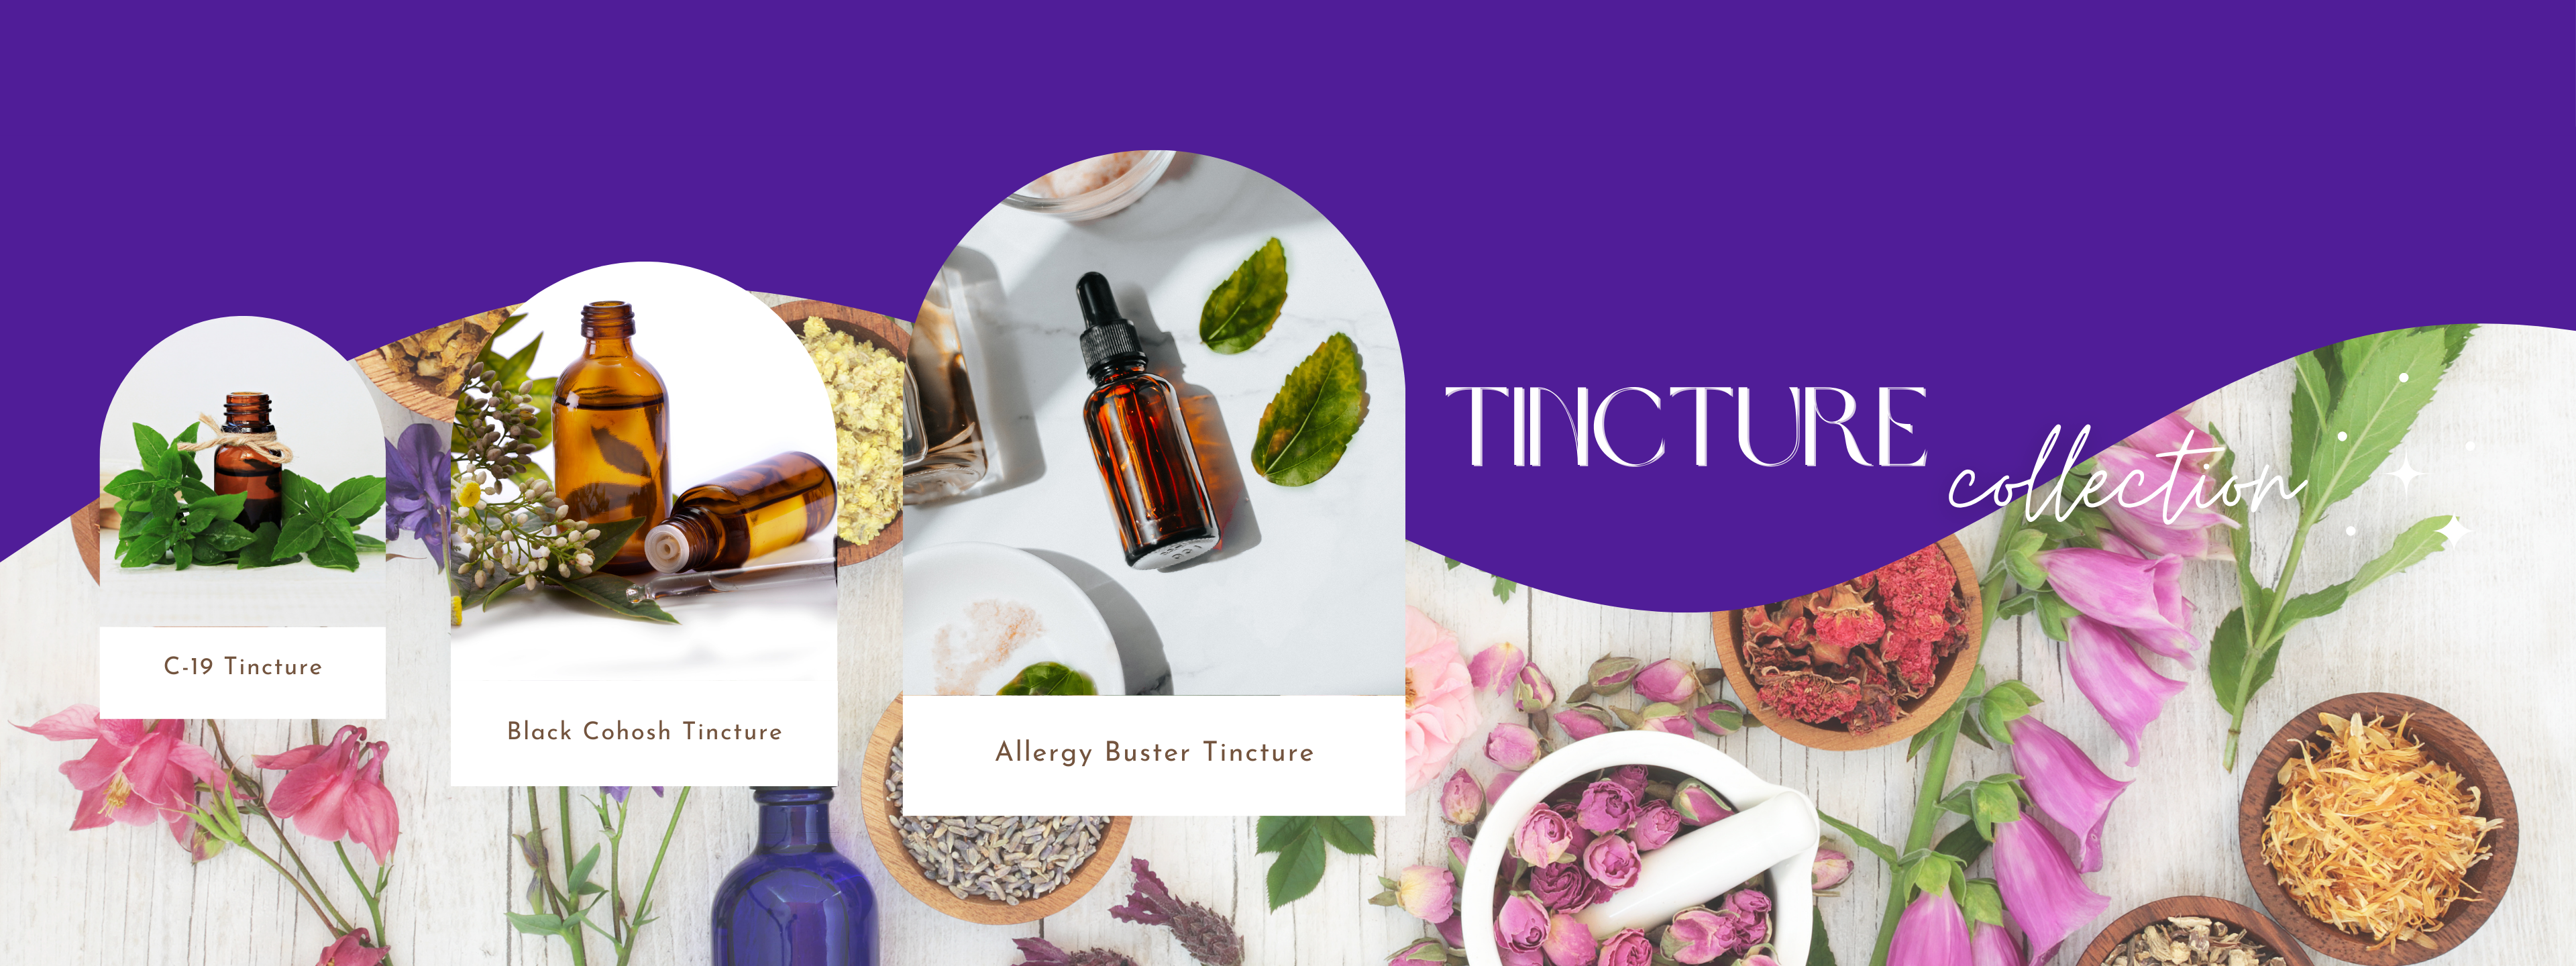 files/Tincture_Collection_banner.png